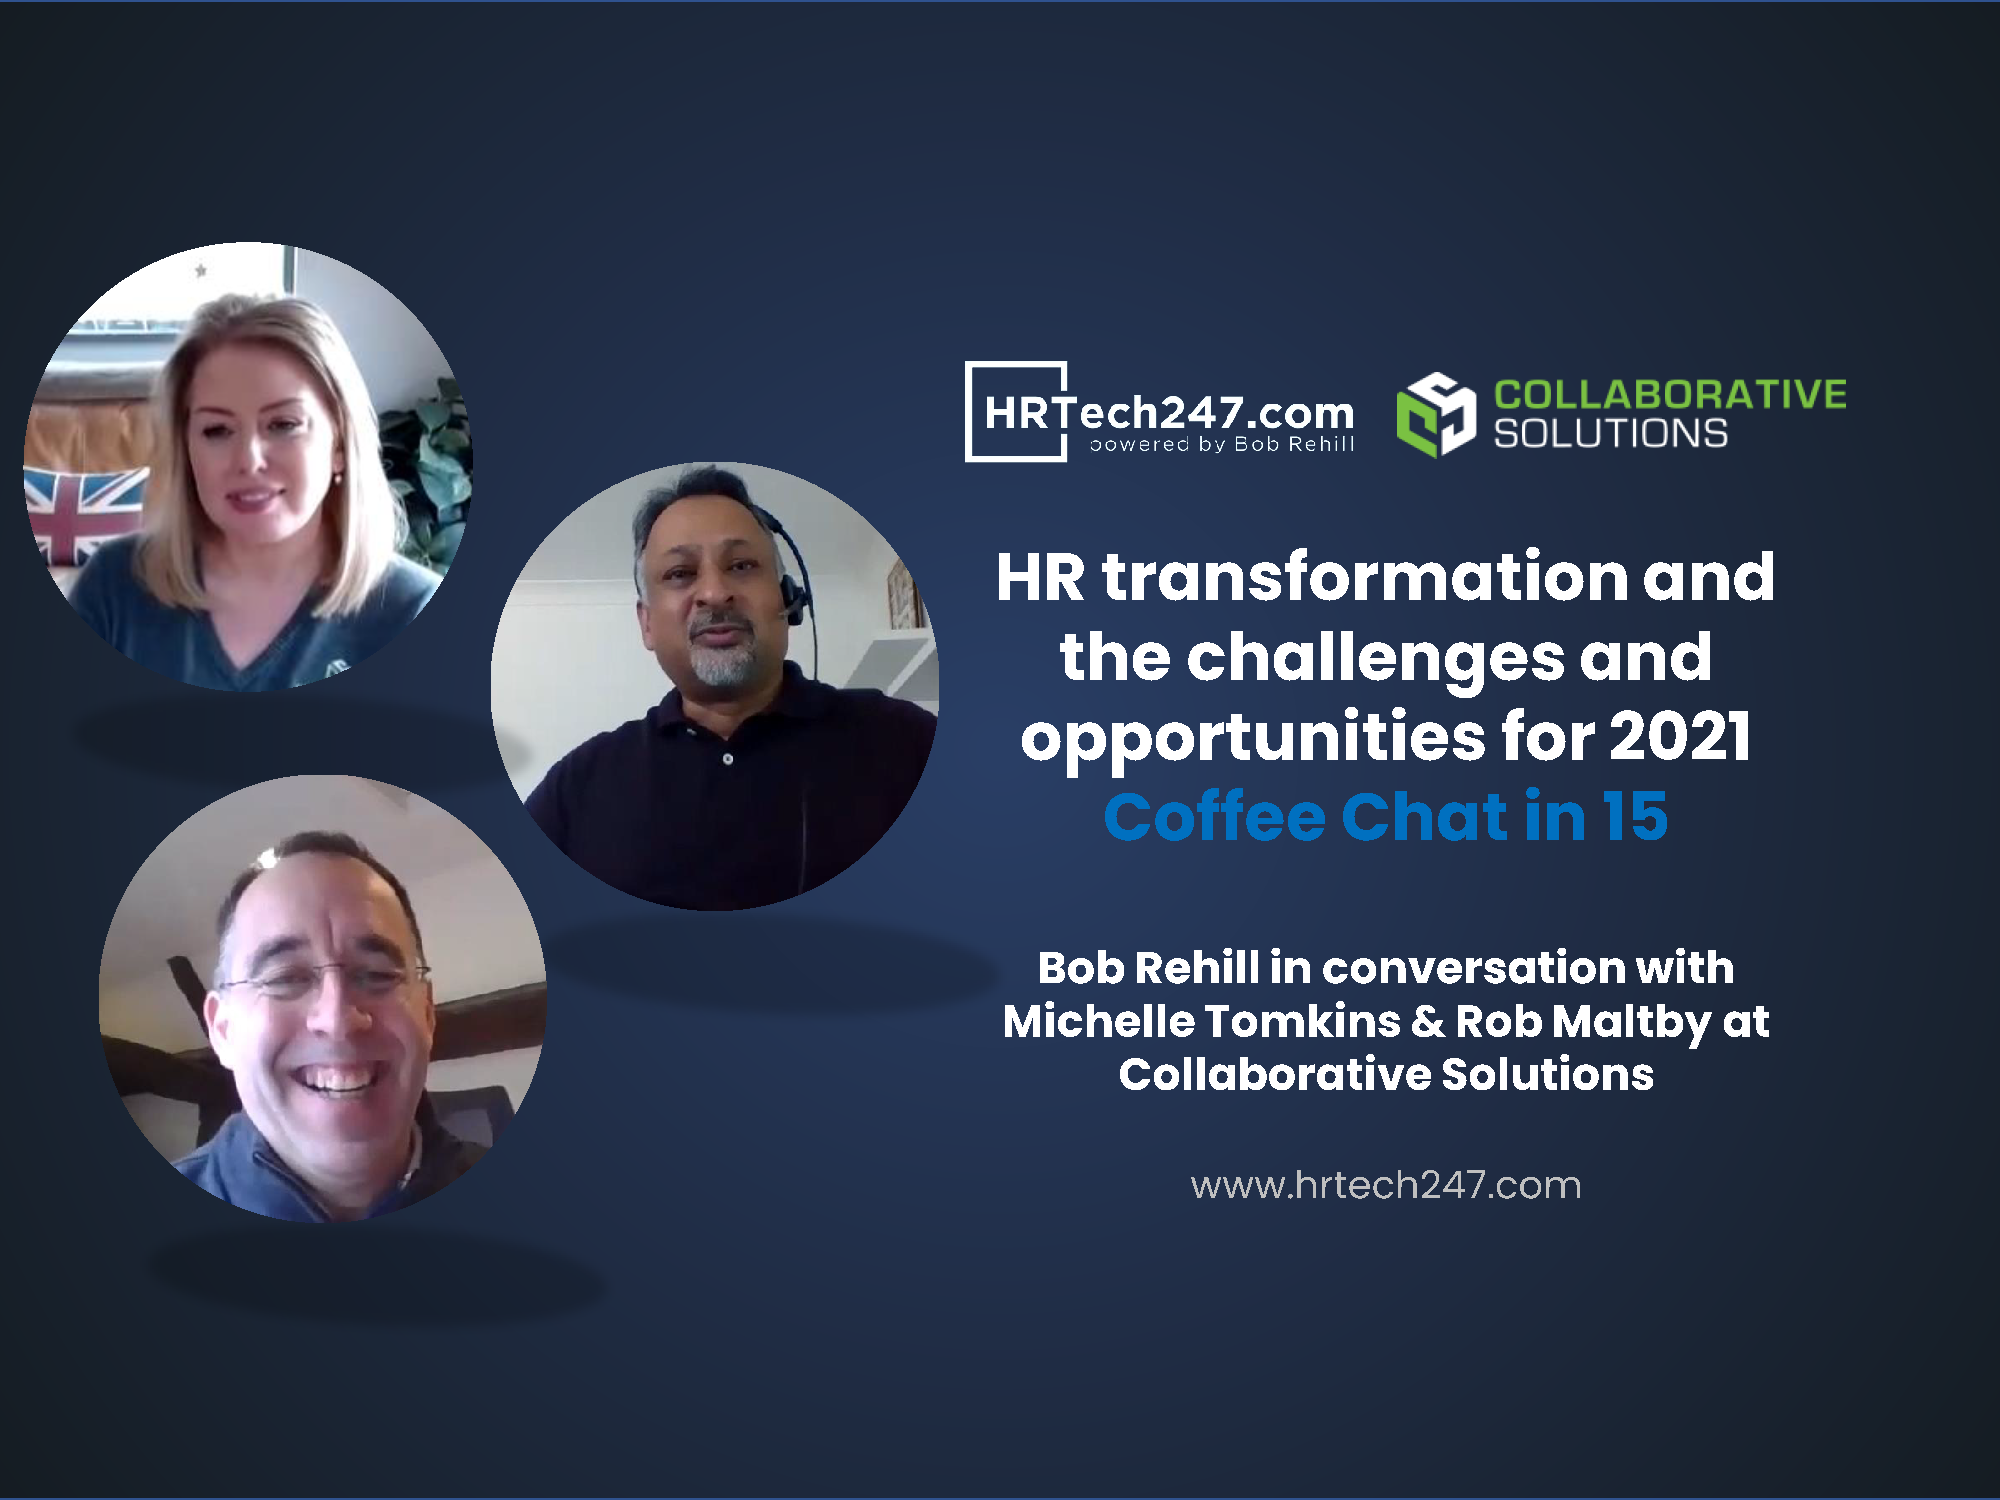 HR transformation and the challenges and opportunities for 2021